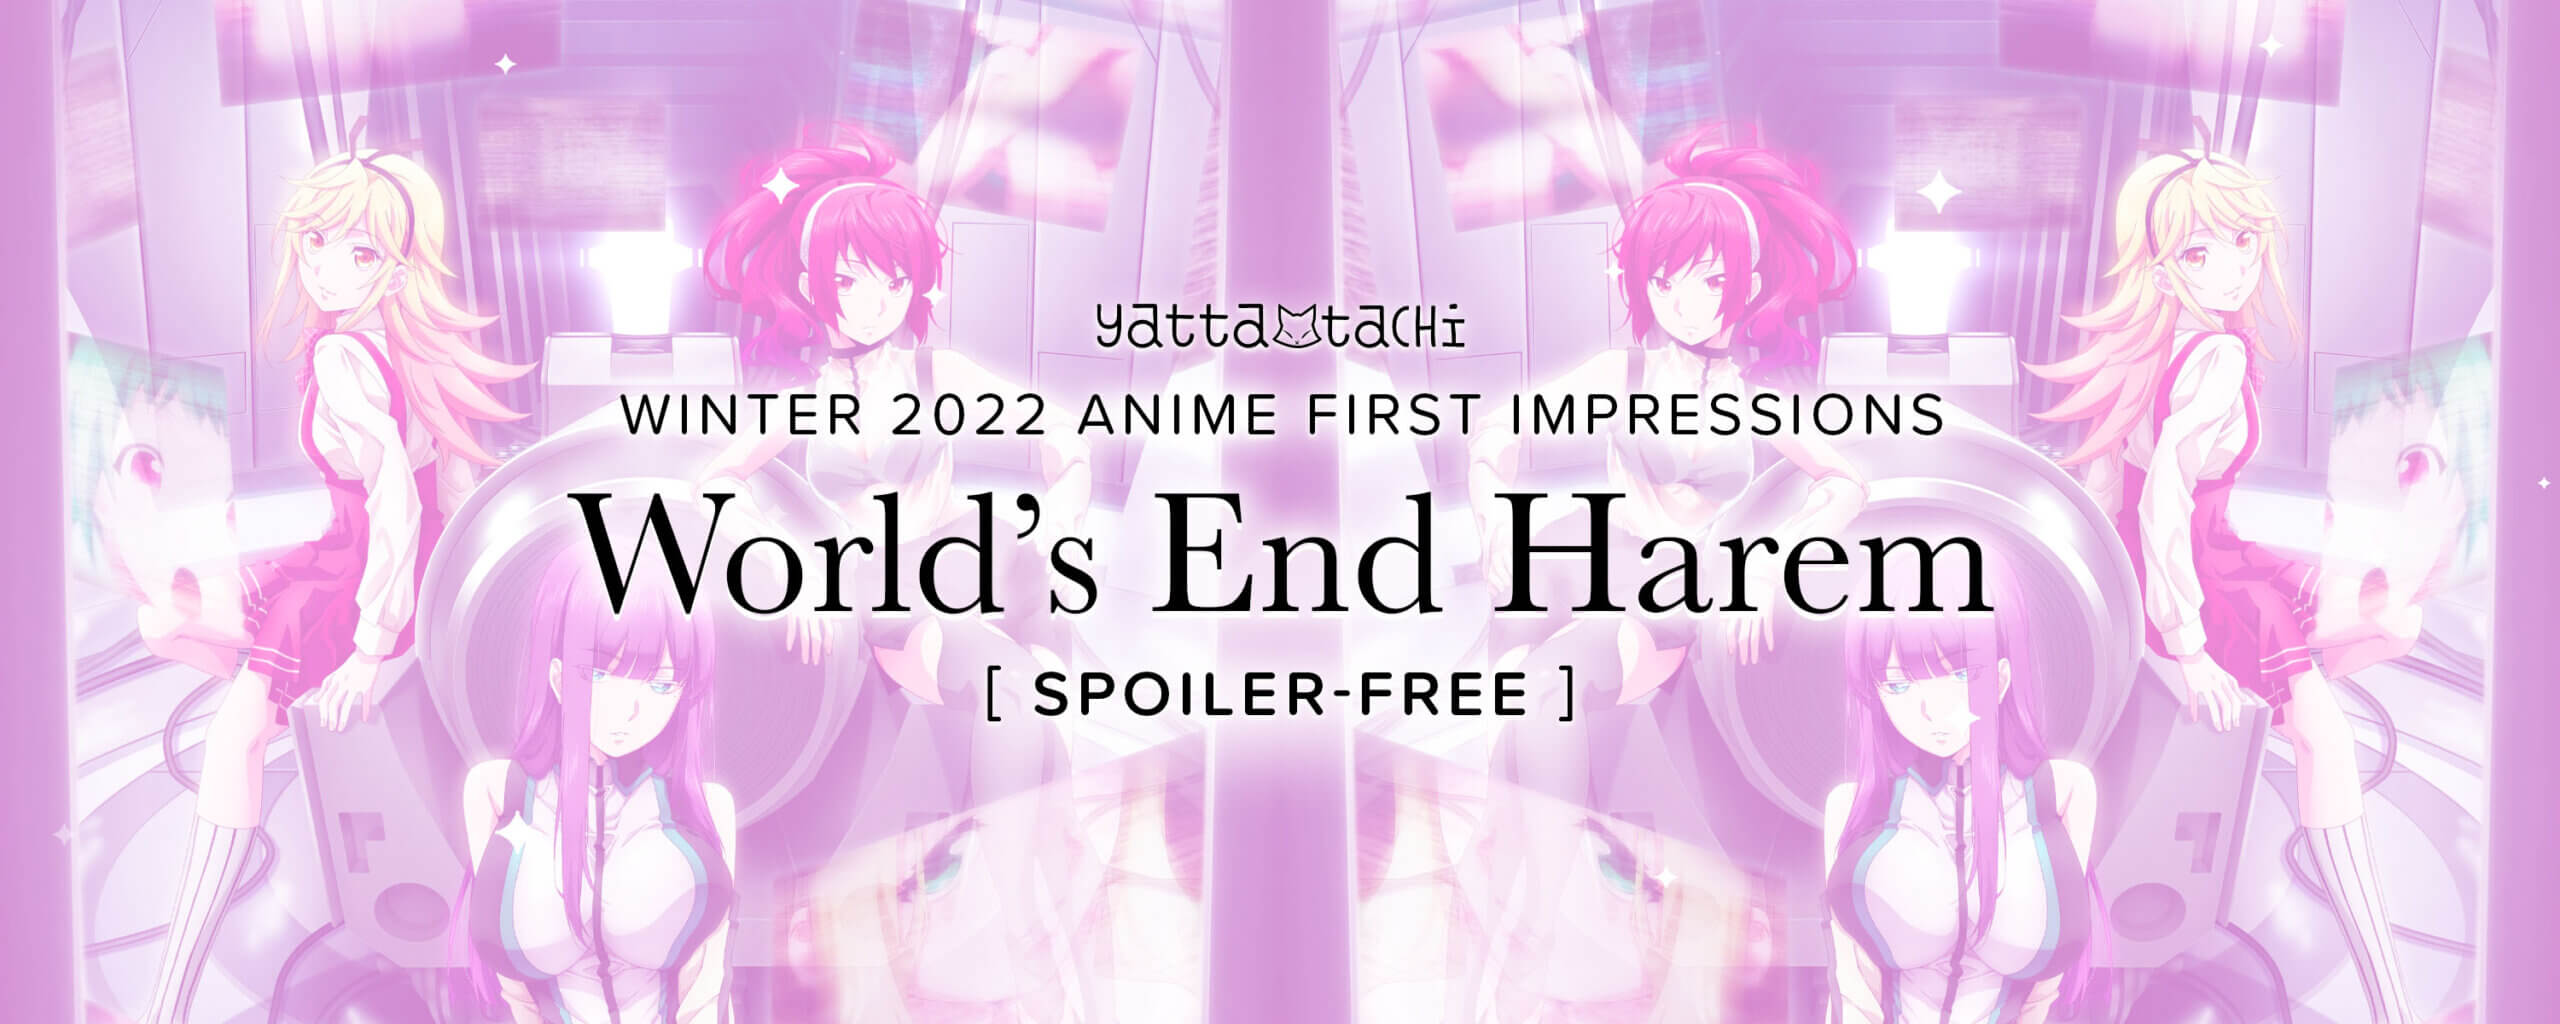 World's End Harem - Winter 2022 Anime First Impressions (Spoiler-Free)